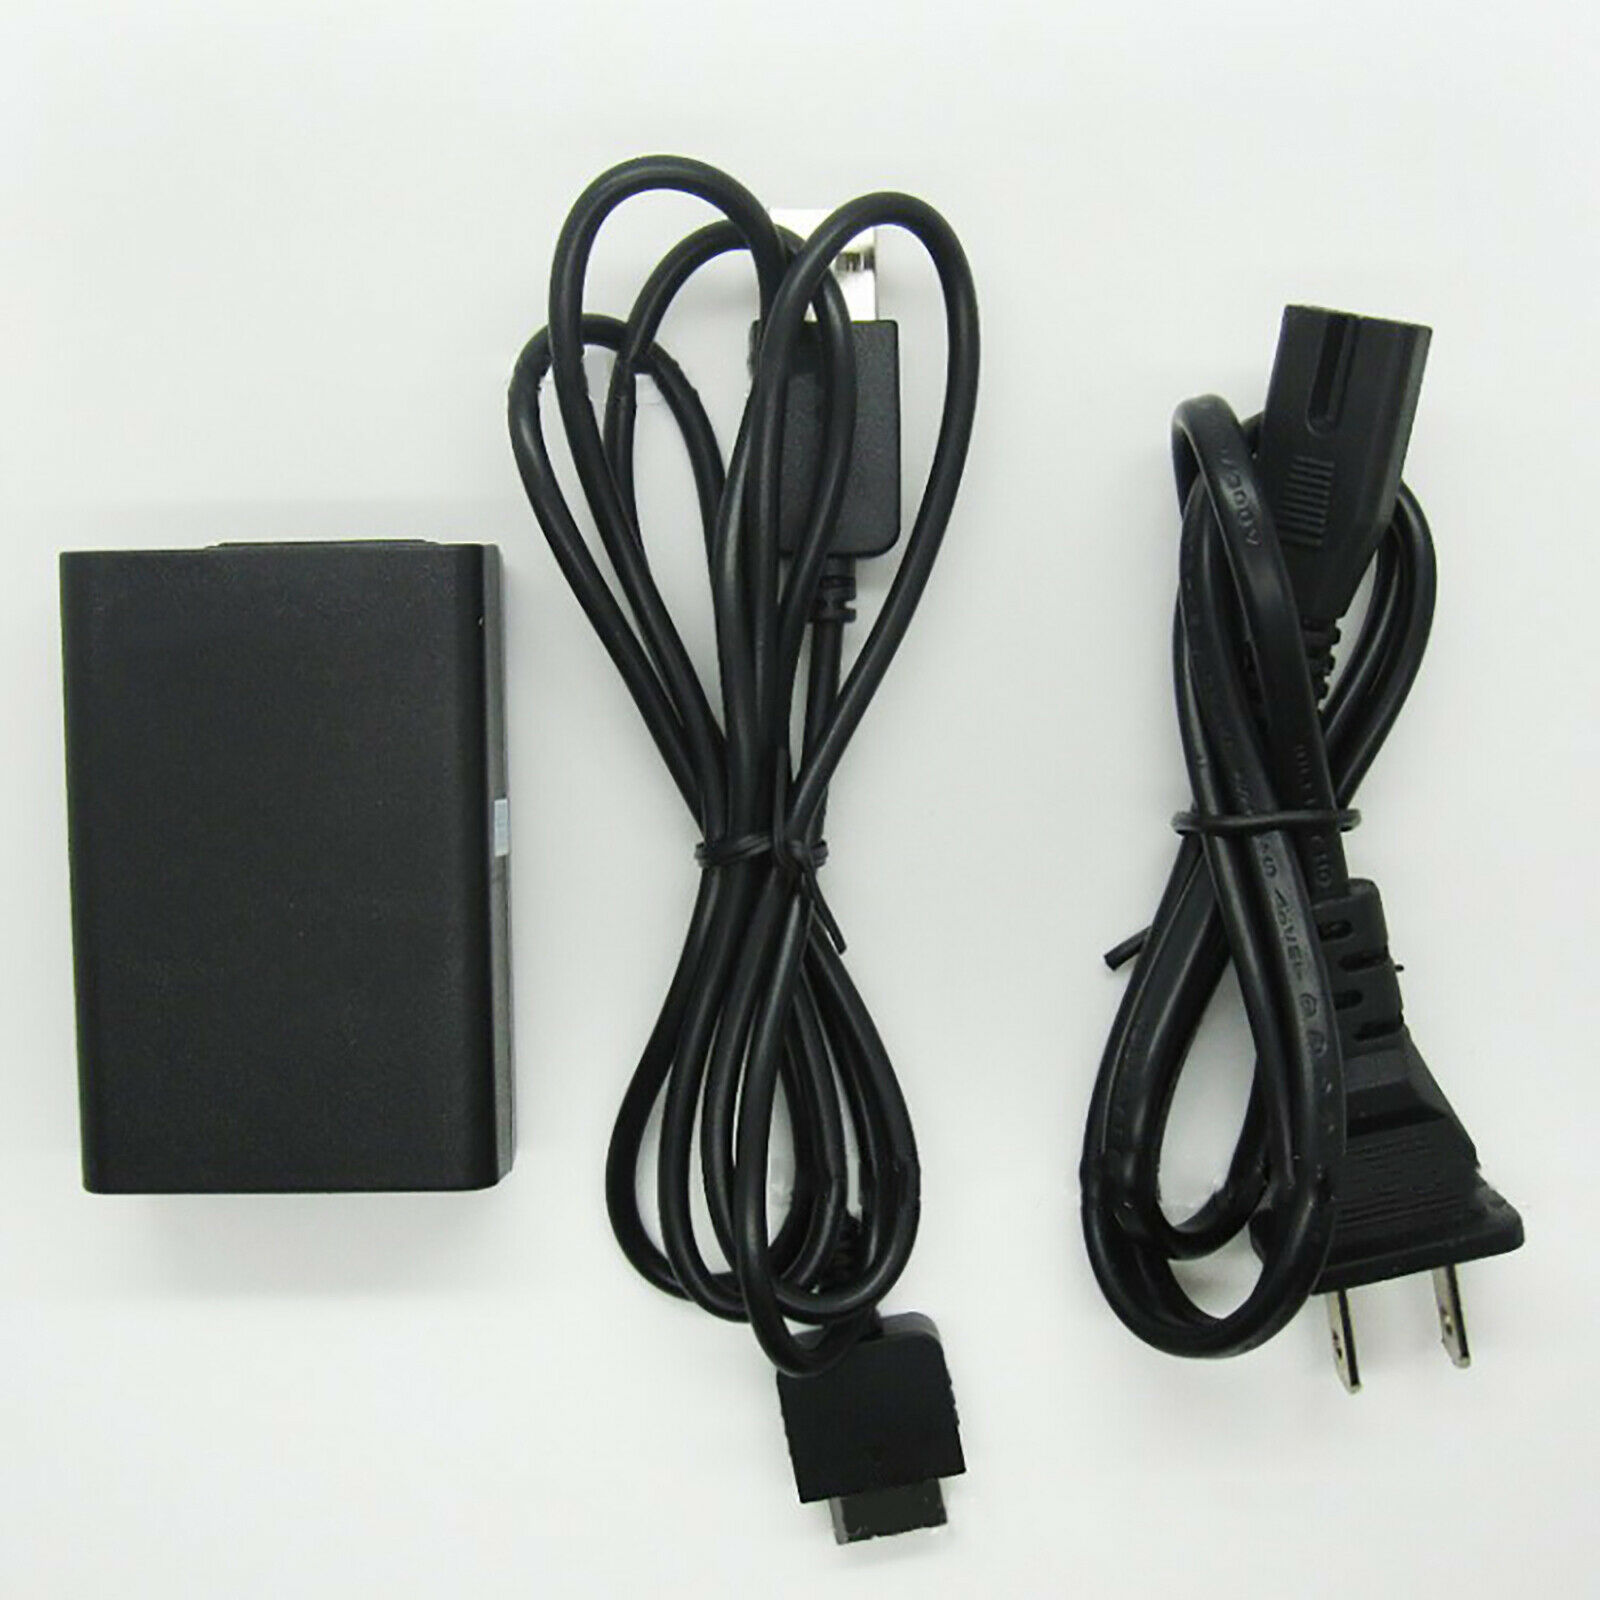 5V/1.5A Power Adapter Charger Charging for Sony PS Vita PSV Game Console US Plug Compatible Model: For PS Vita PSV Gam